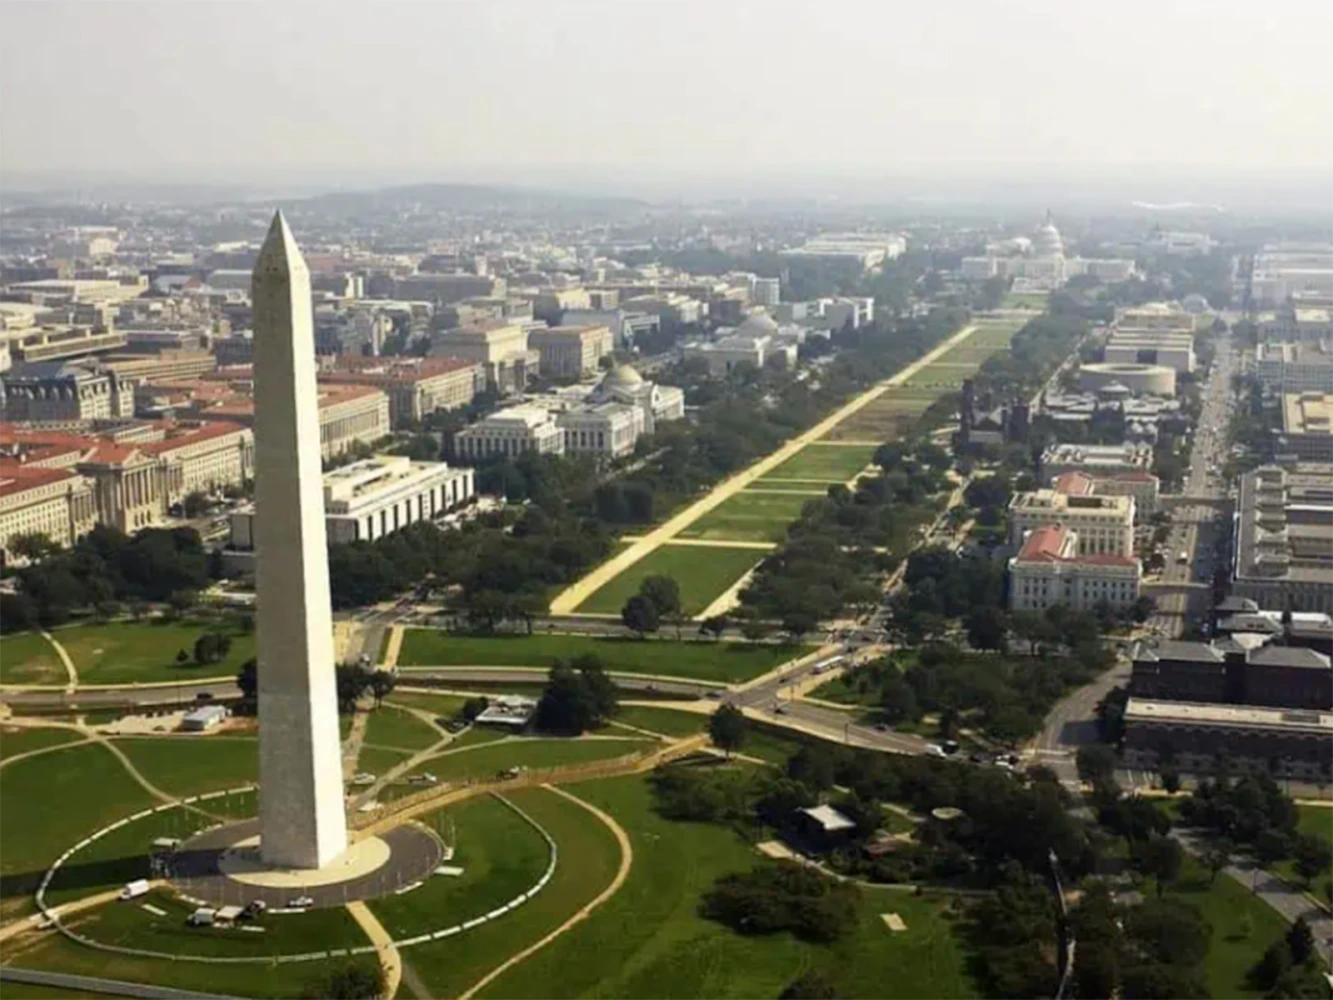 DC Highlights and Washington Monument Tour: What to expect - 2